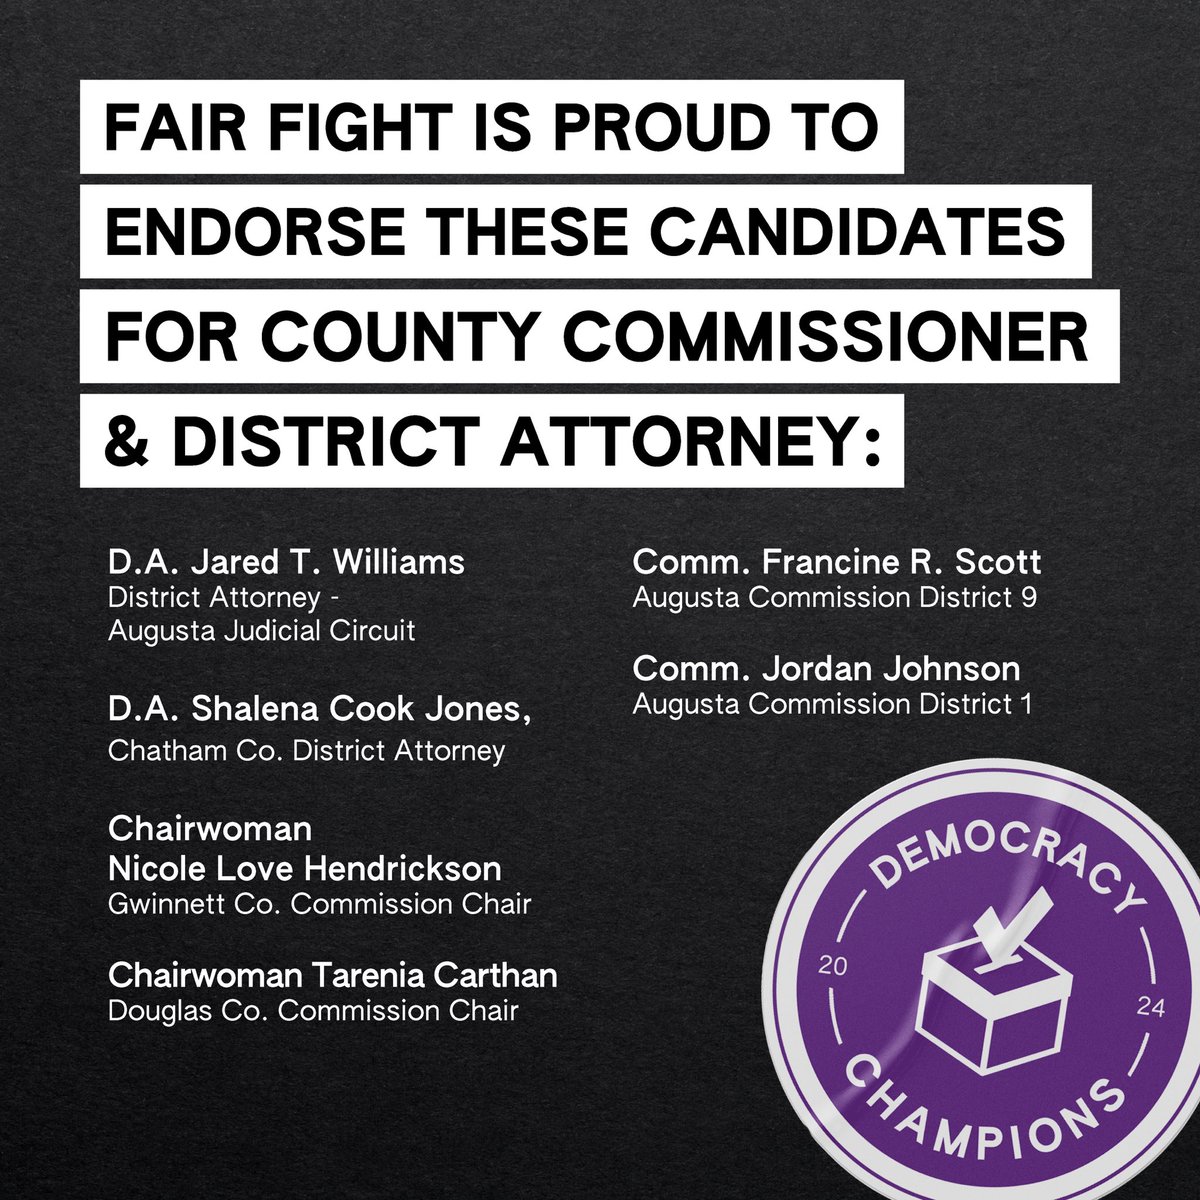 Fair Fight is proud to endorse a diverse slate of pro-voter Democracy Champions for the May 21 Primary Election. These Democracy Champions will work to ensure Georgians can freely cast their ballot so that every voice is heard.